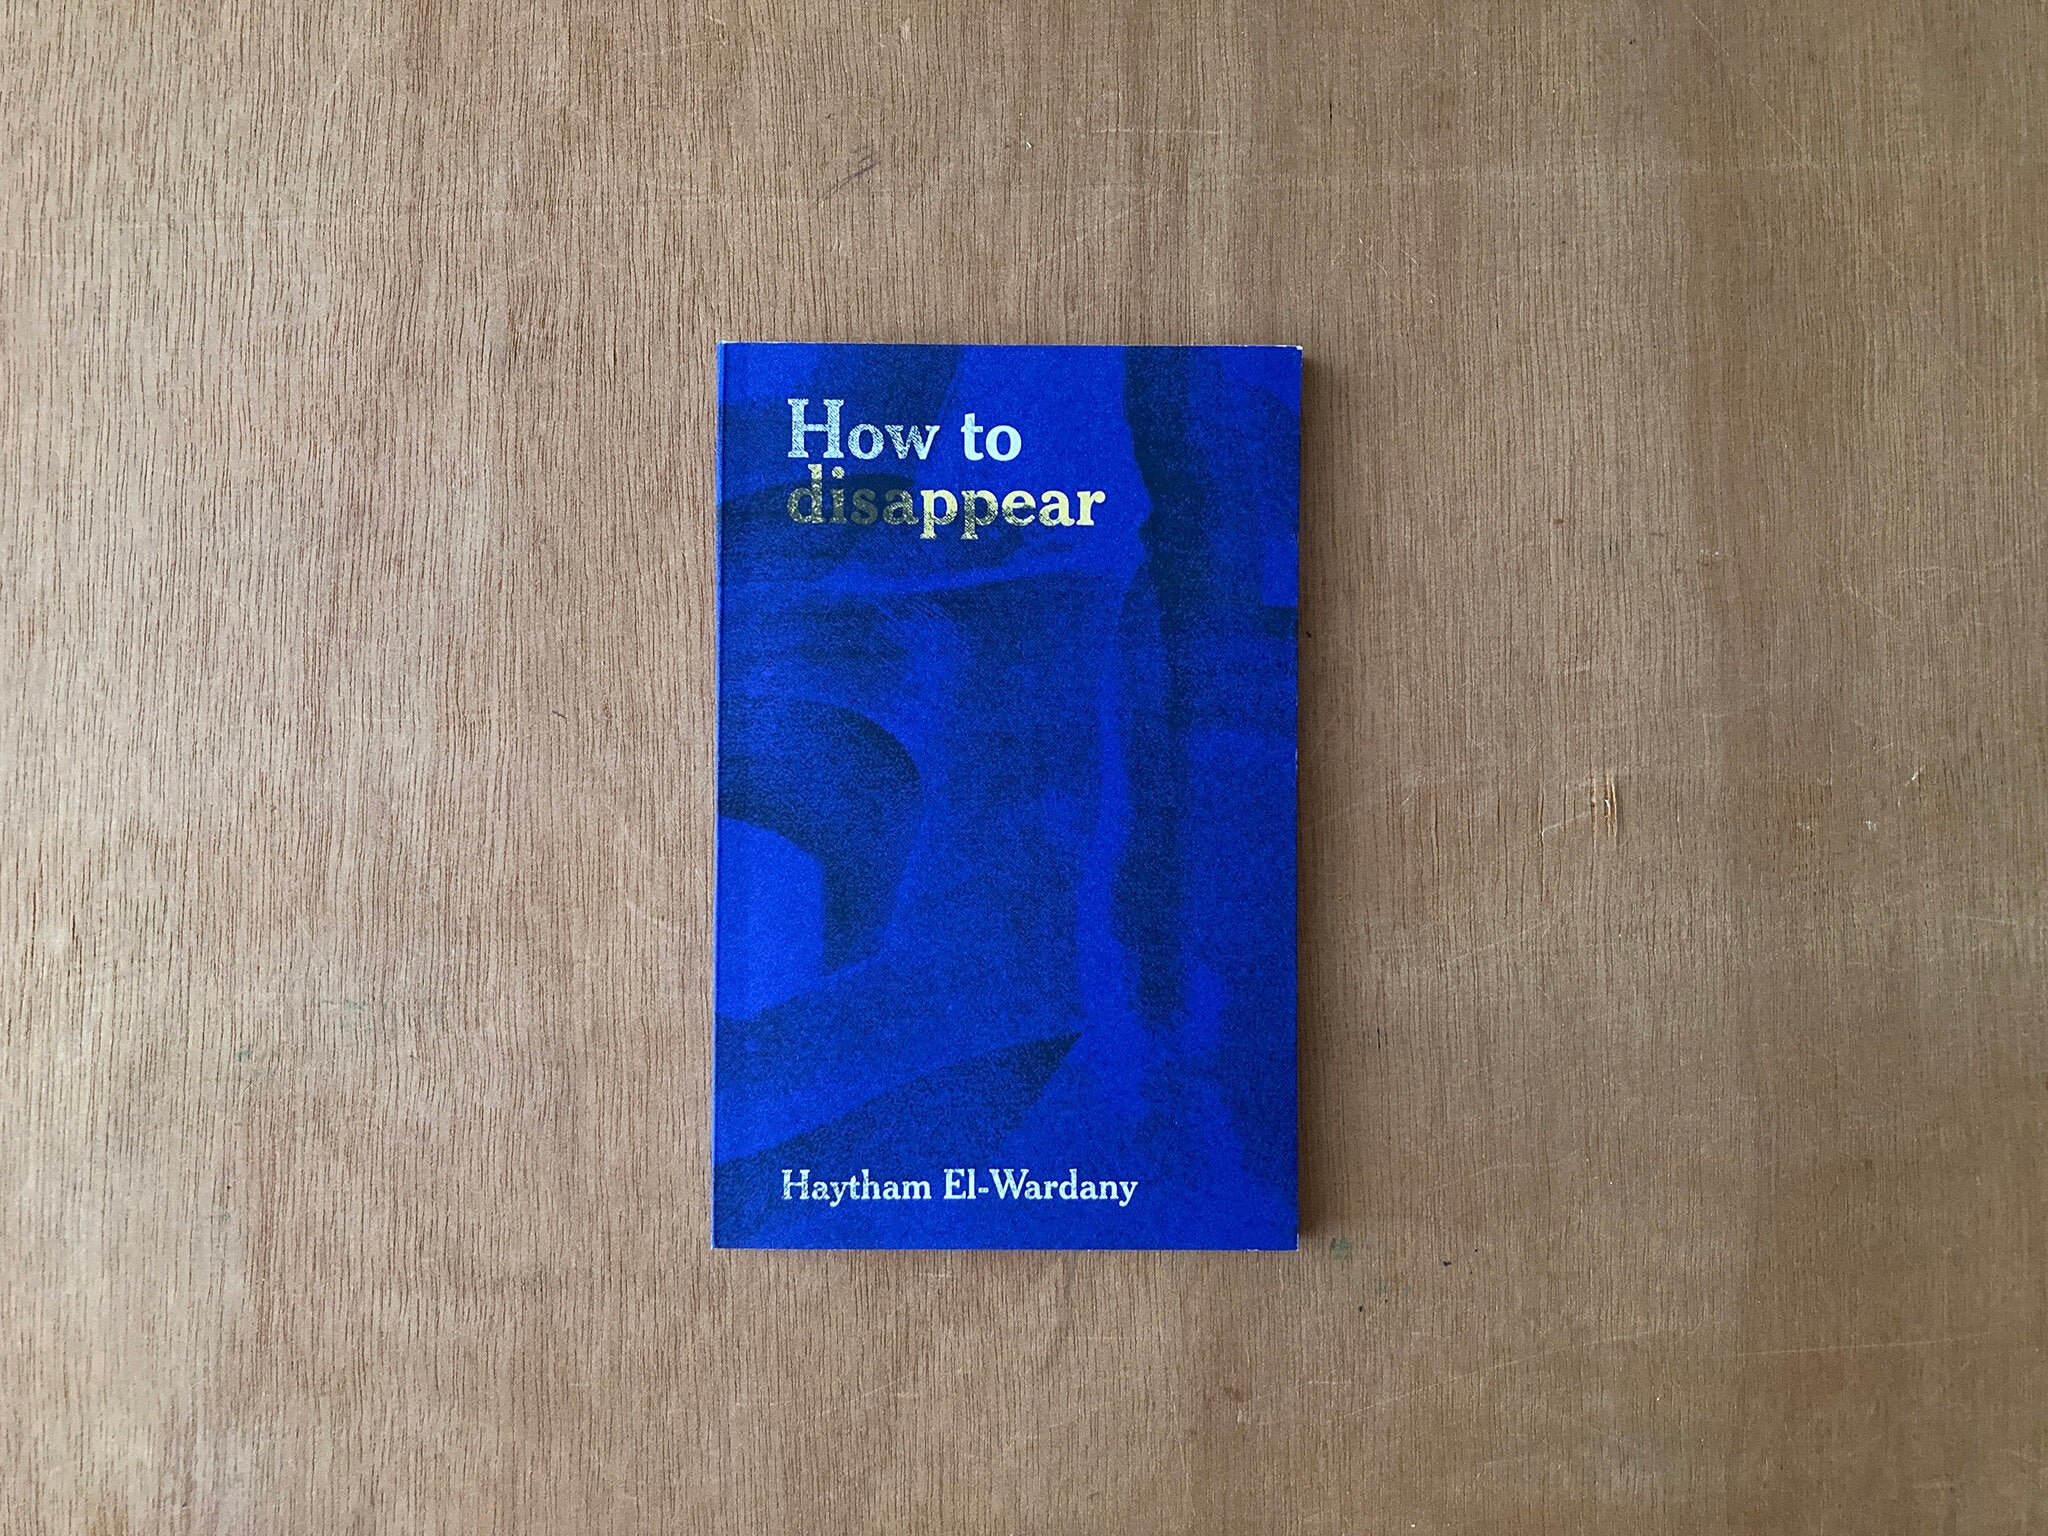 HOW TO DISAPPEAR by Haytham El-Wardany